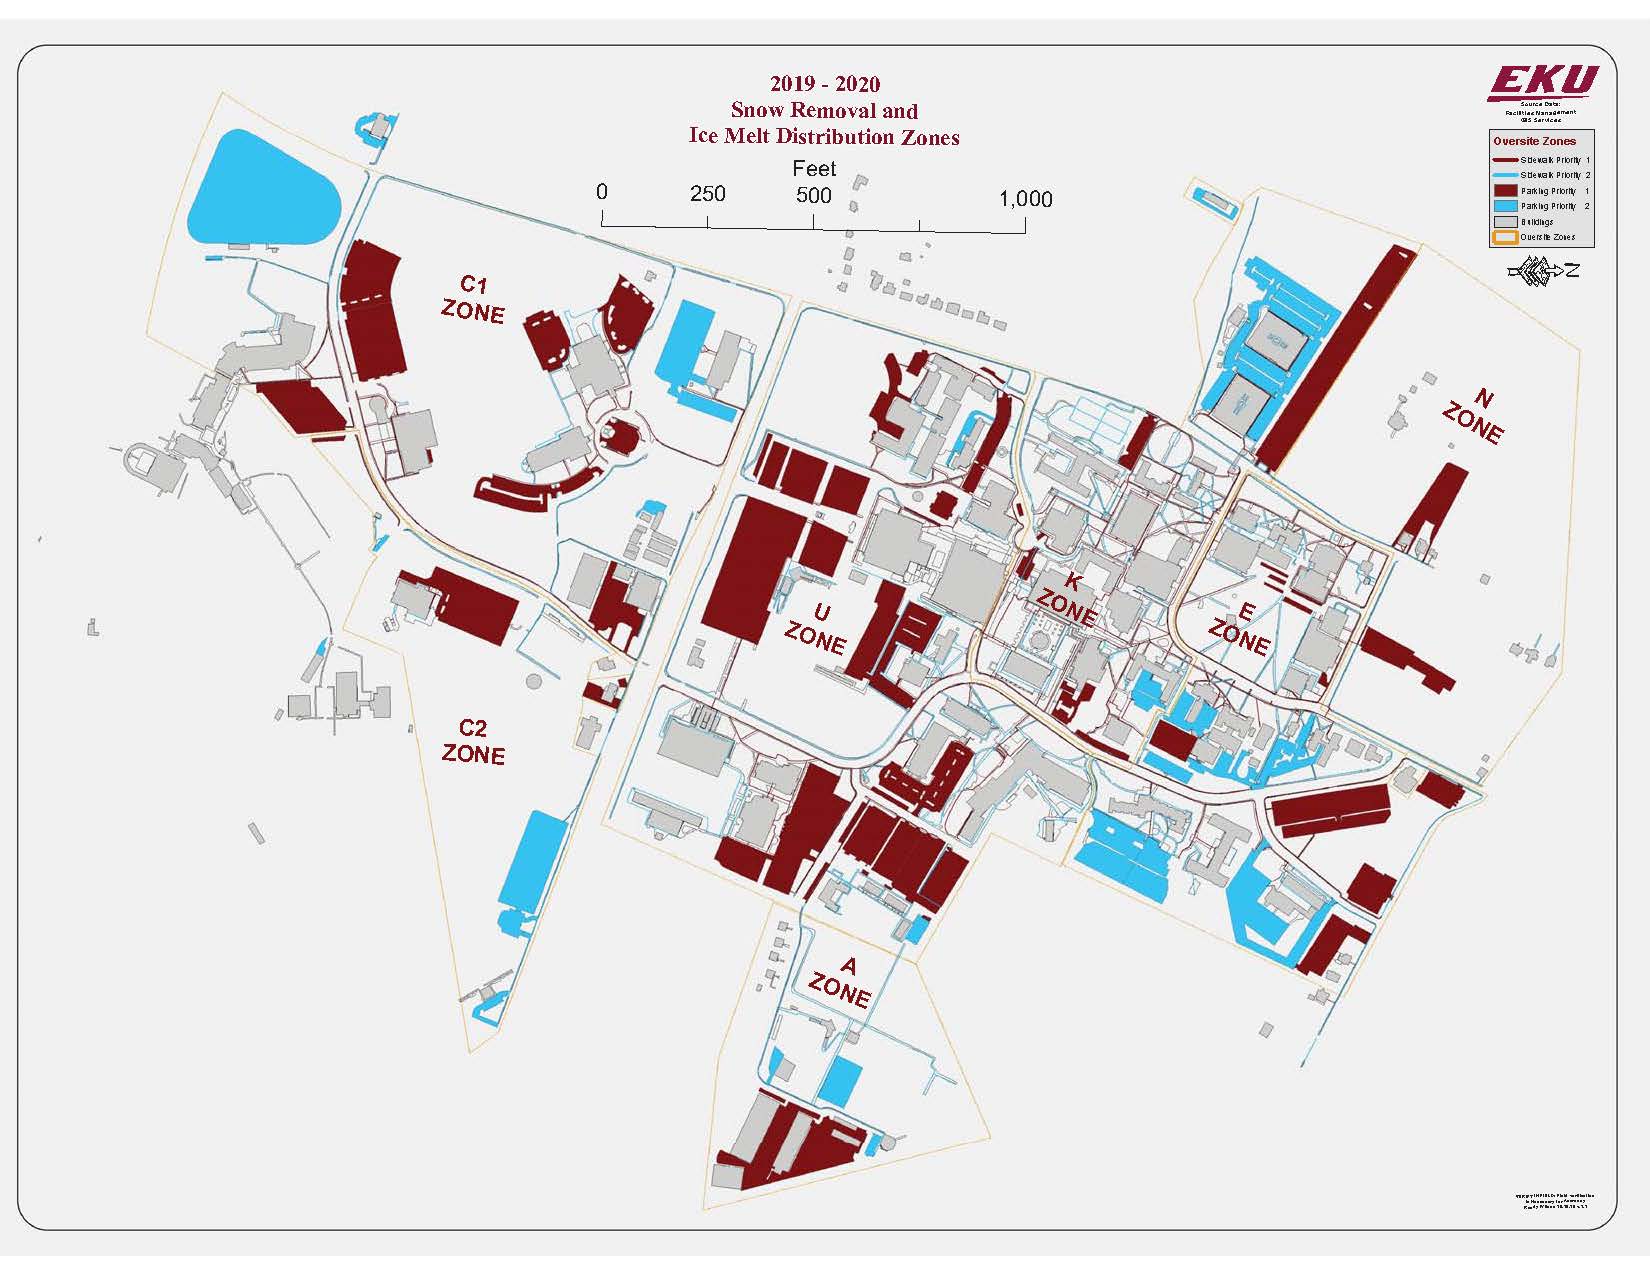 An image of the 2019 - 2020 snow removal and ice melt distribution plan at Eastern Kentucky University.